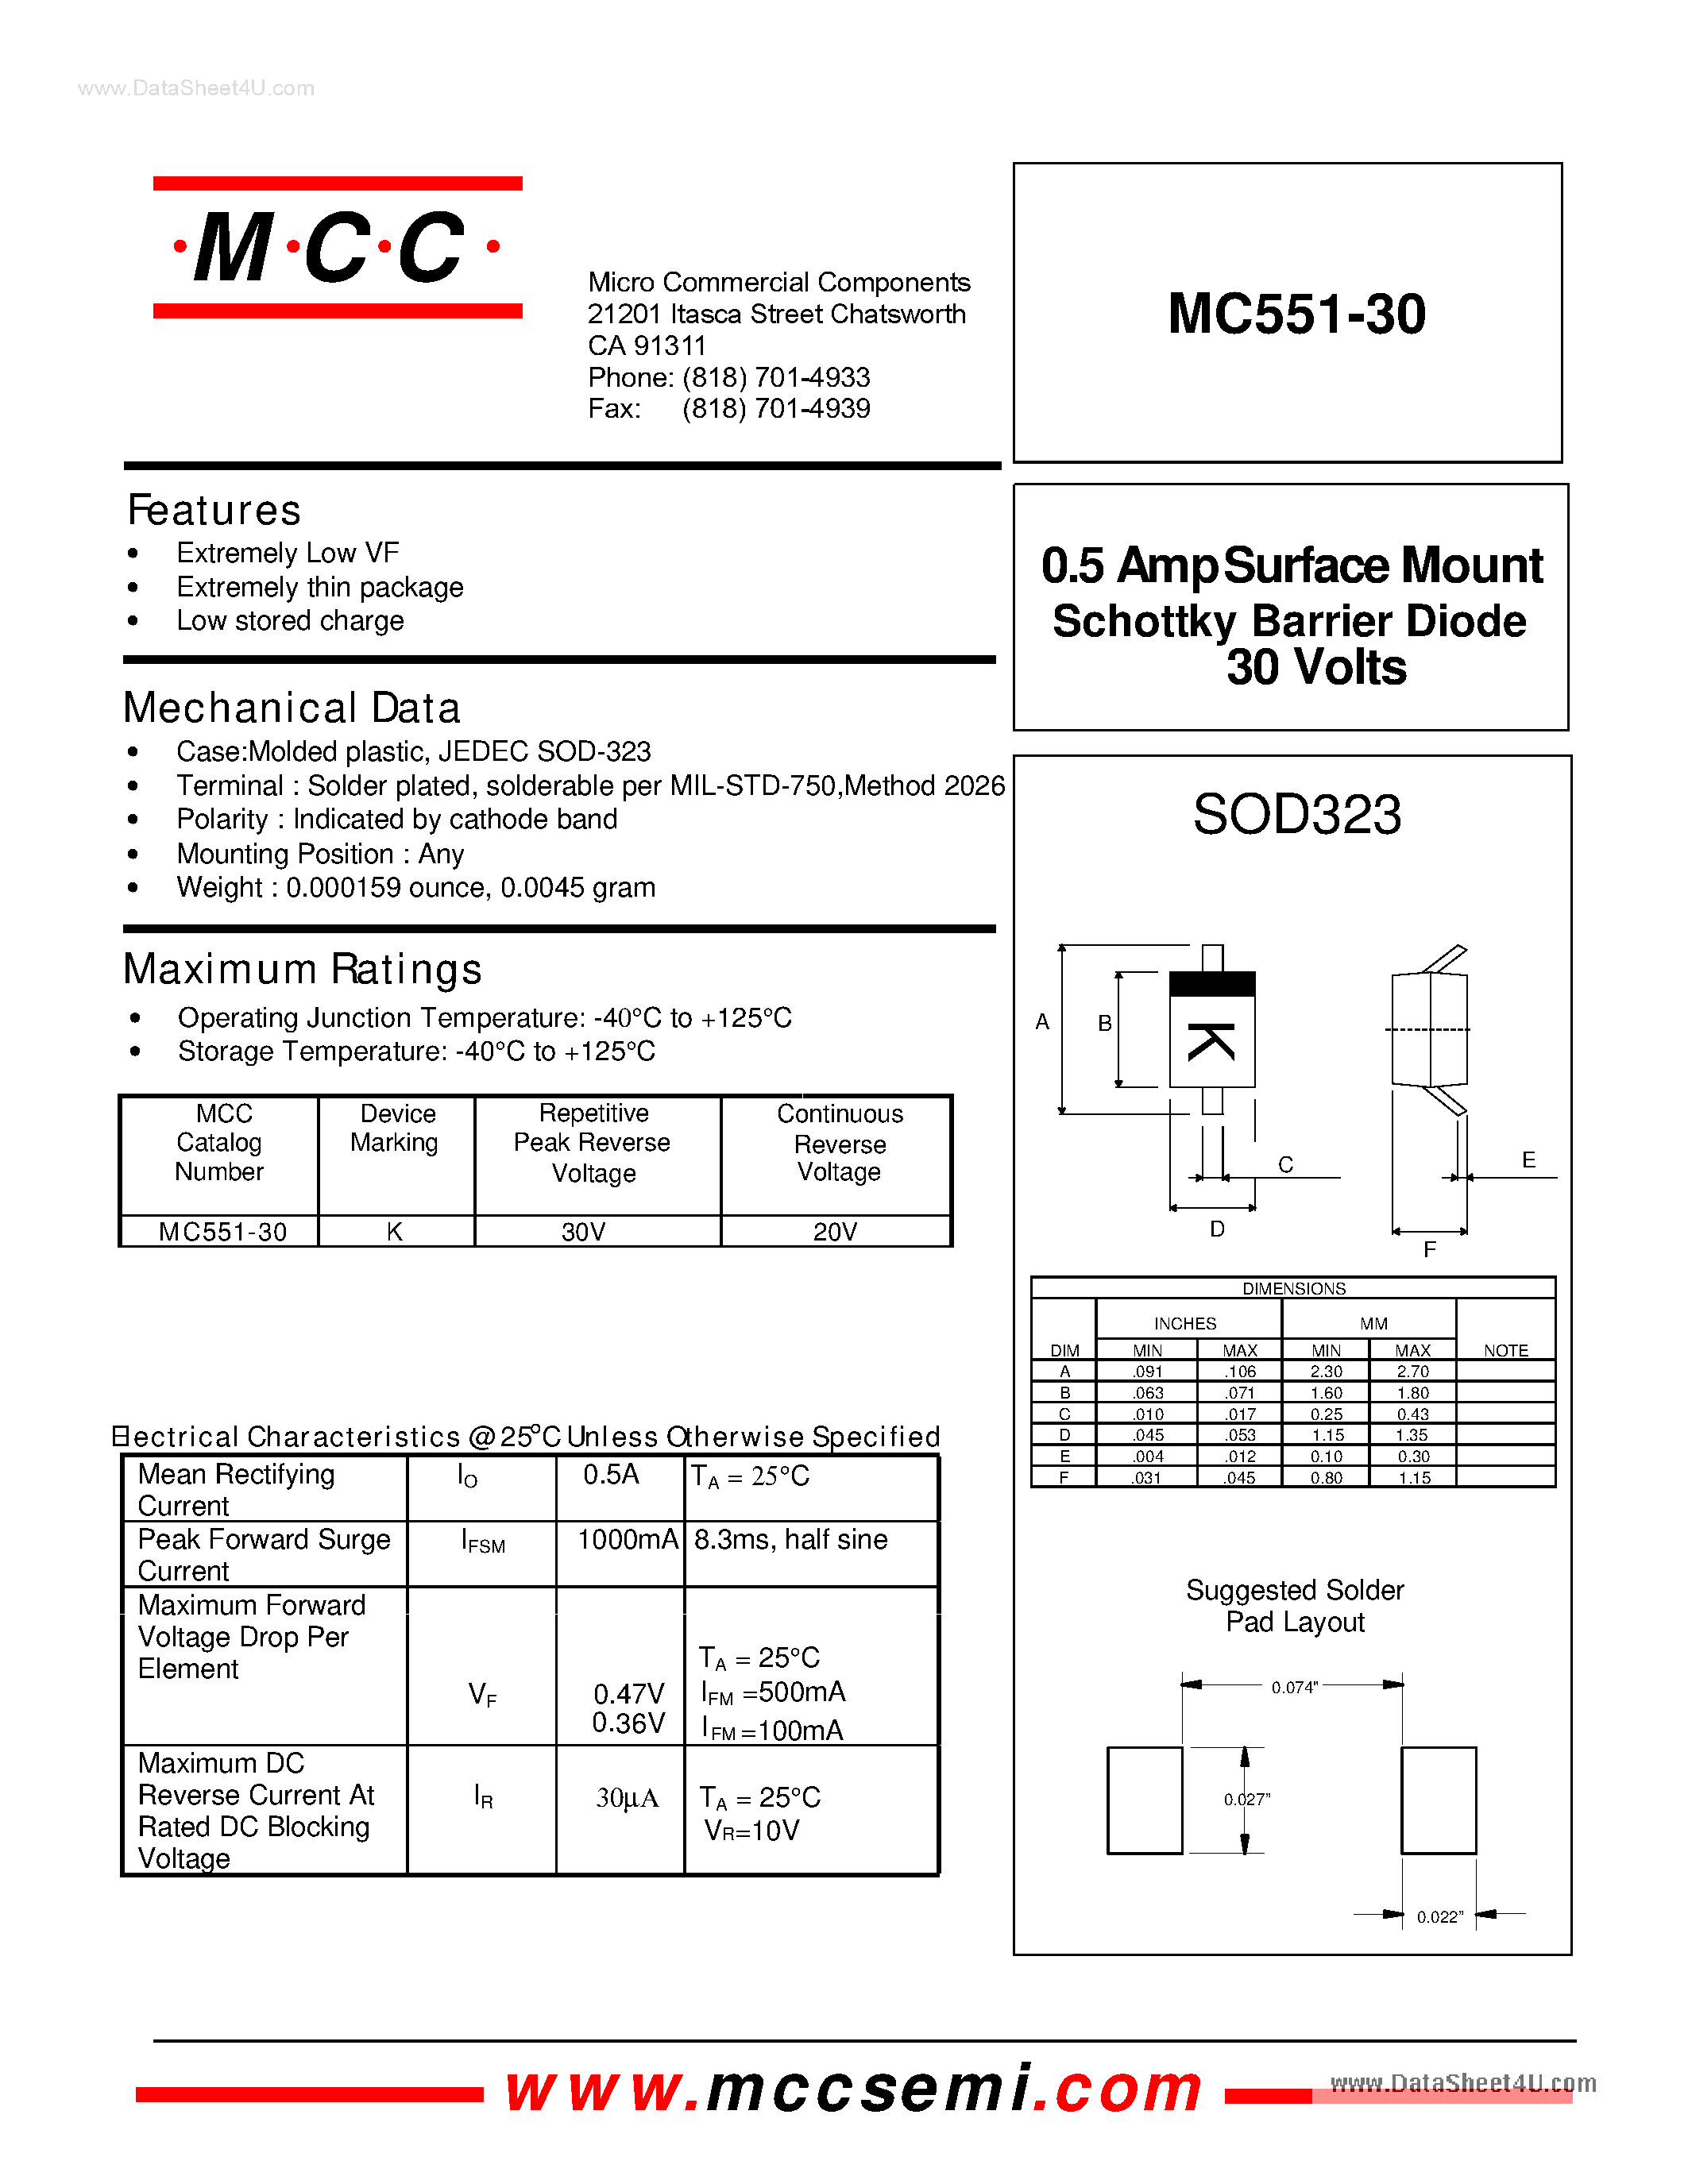 Даташит MC551-30 - Surface Mount Schottky Barrier Diode страница 1